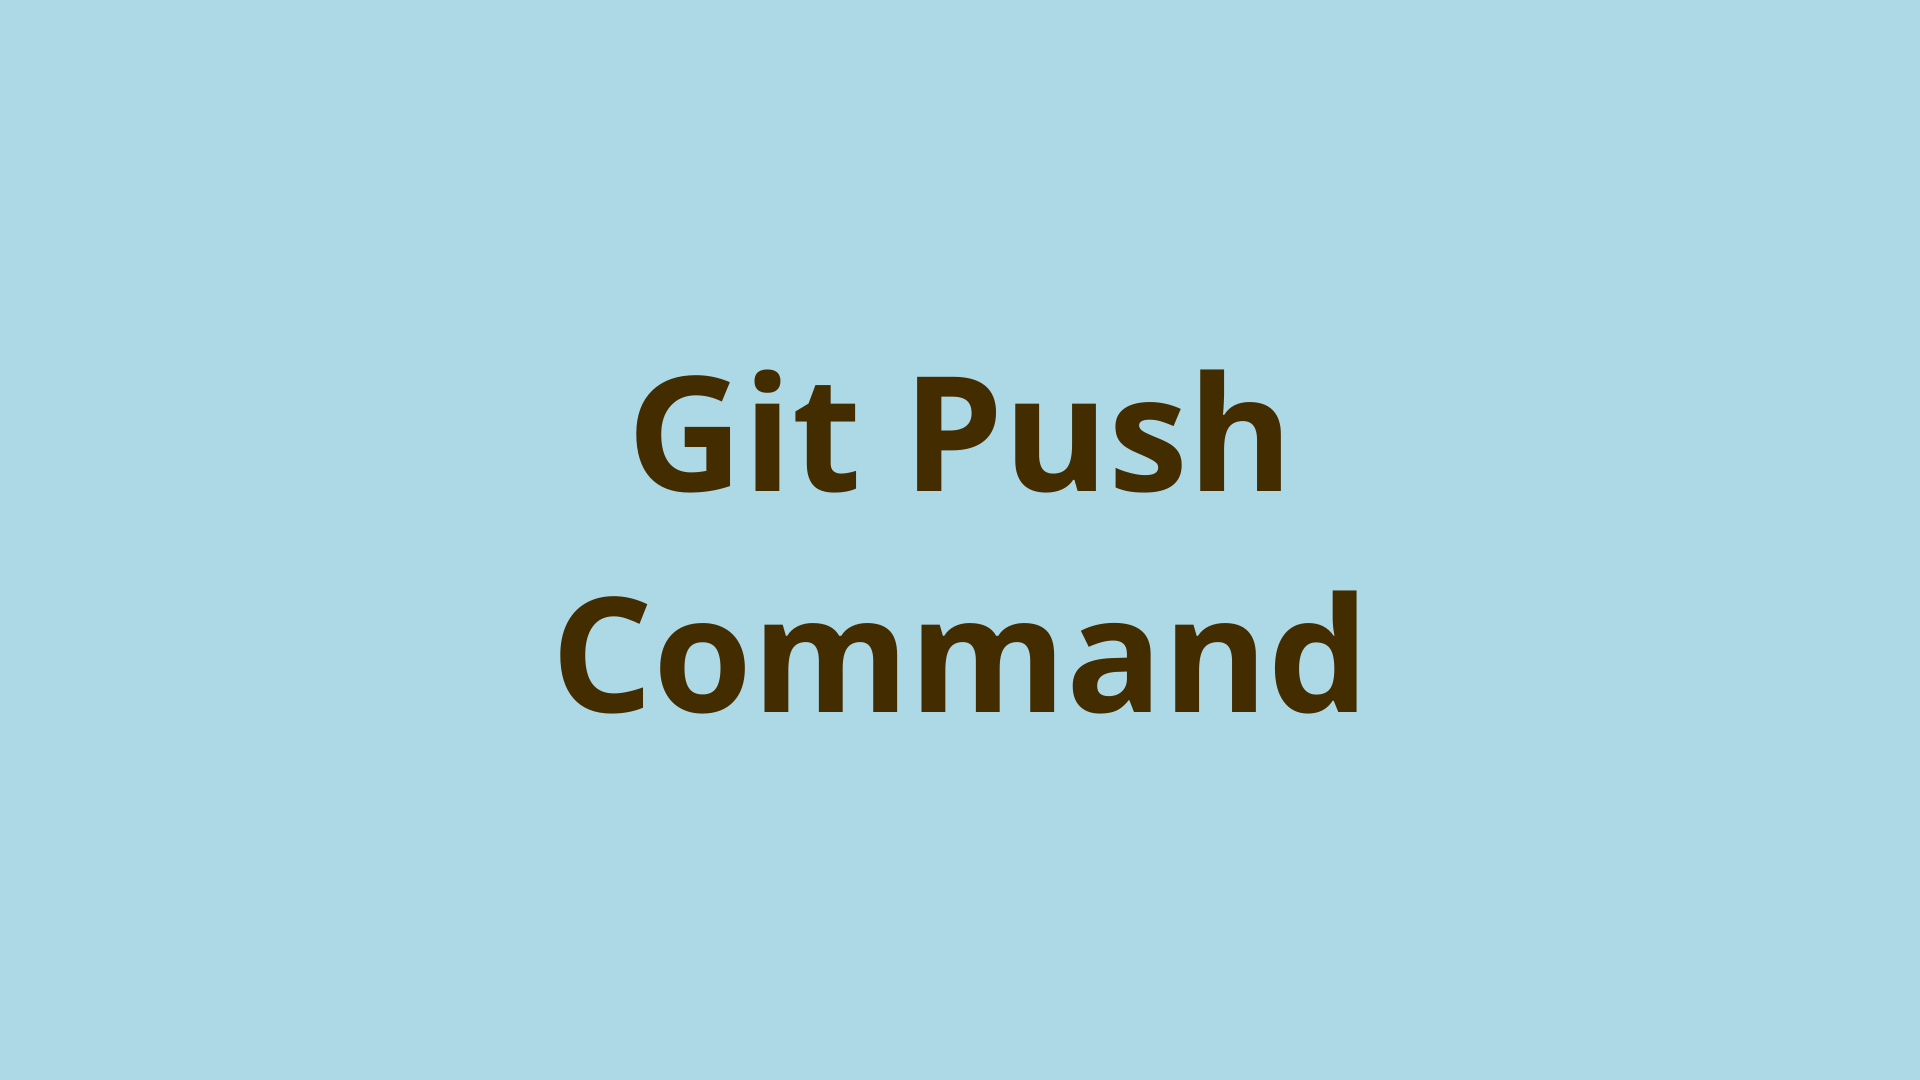 Image of git push | Pushing changes to a remote repository